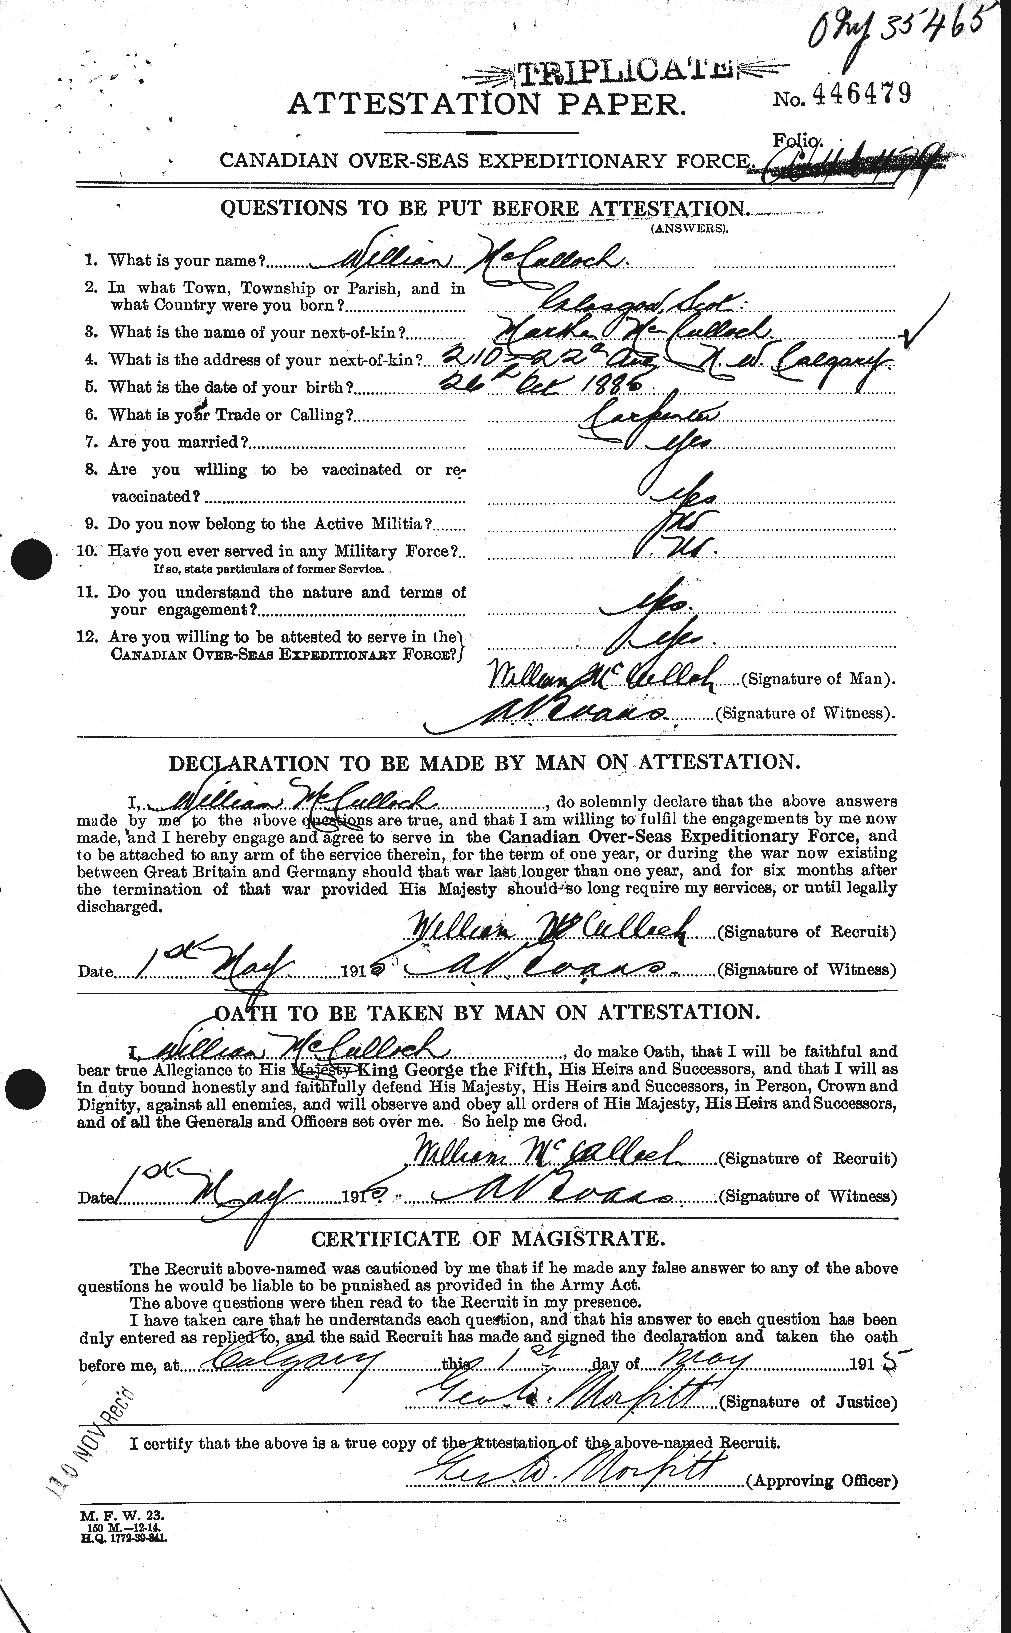 Personnel Records of the First World War - CEF 135160a